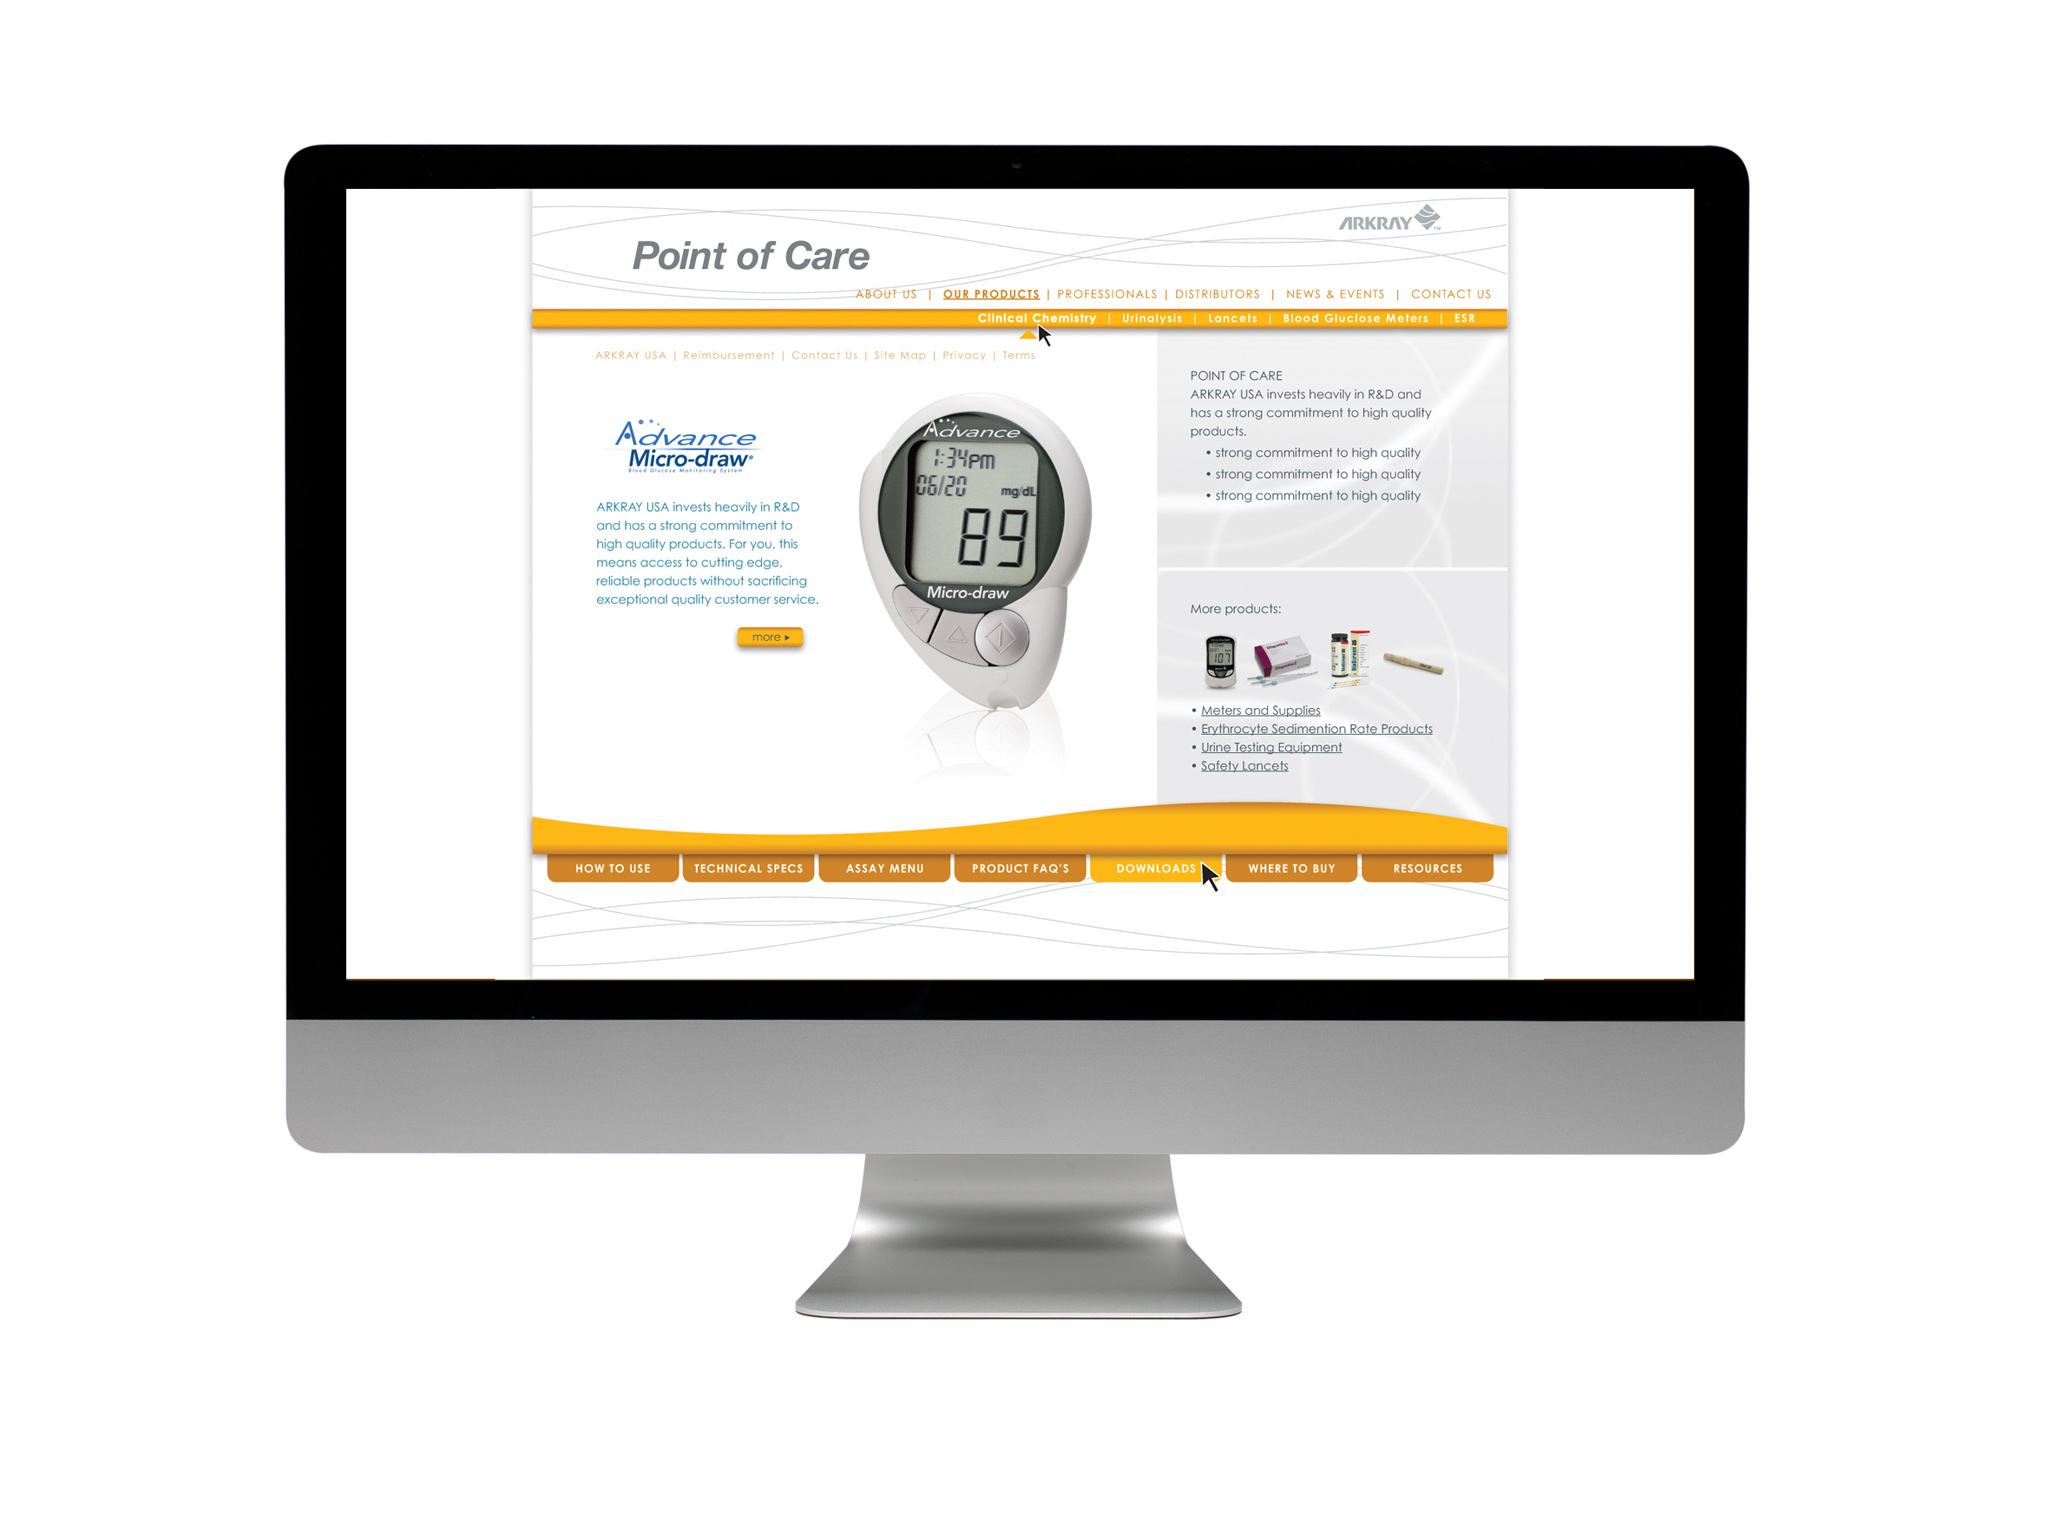 ARKRAY Point of Care Website